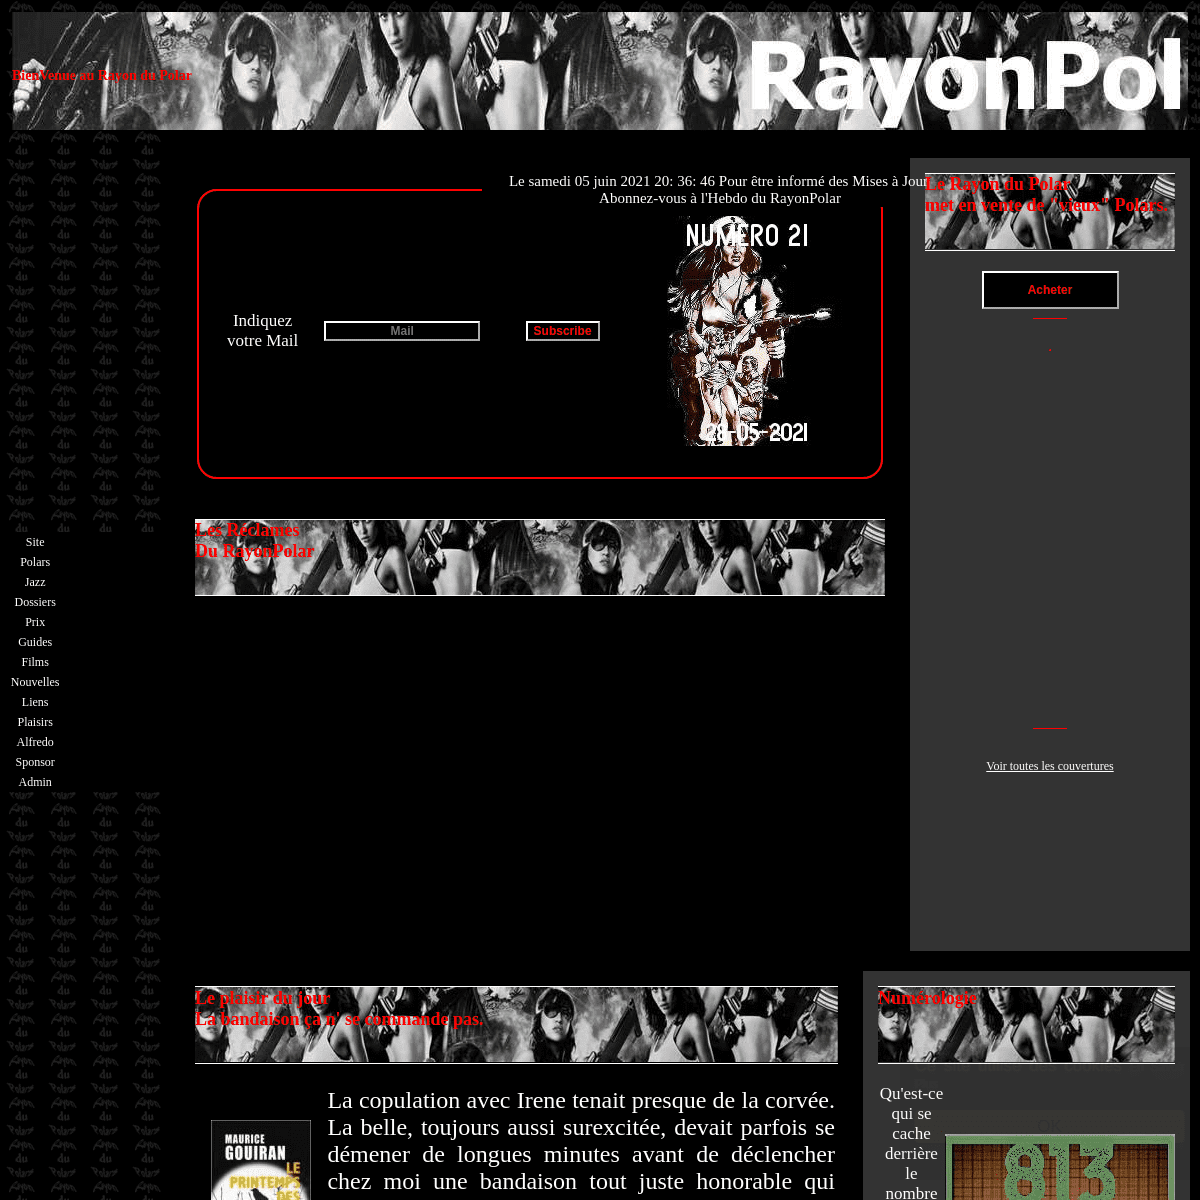 A complete backup of https://rayonpolar.com